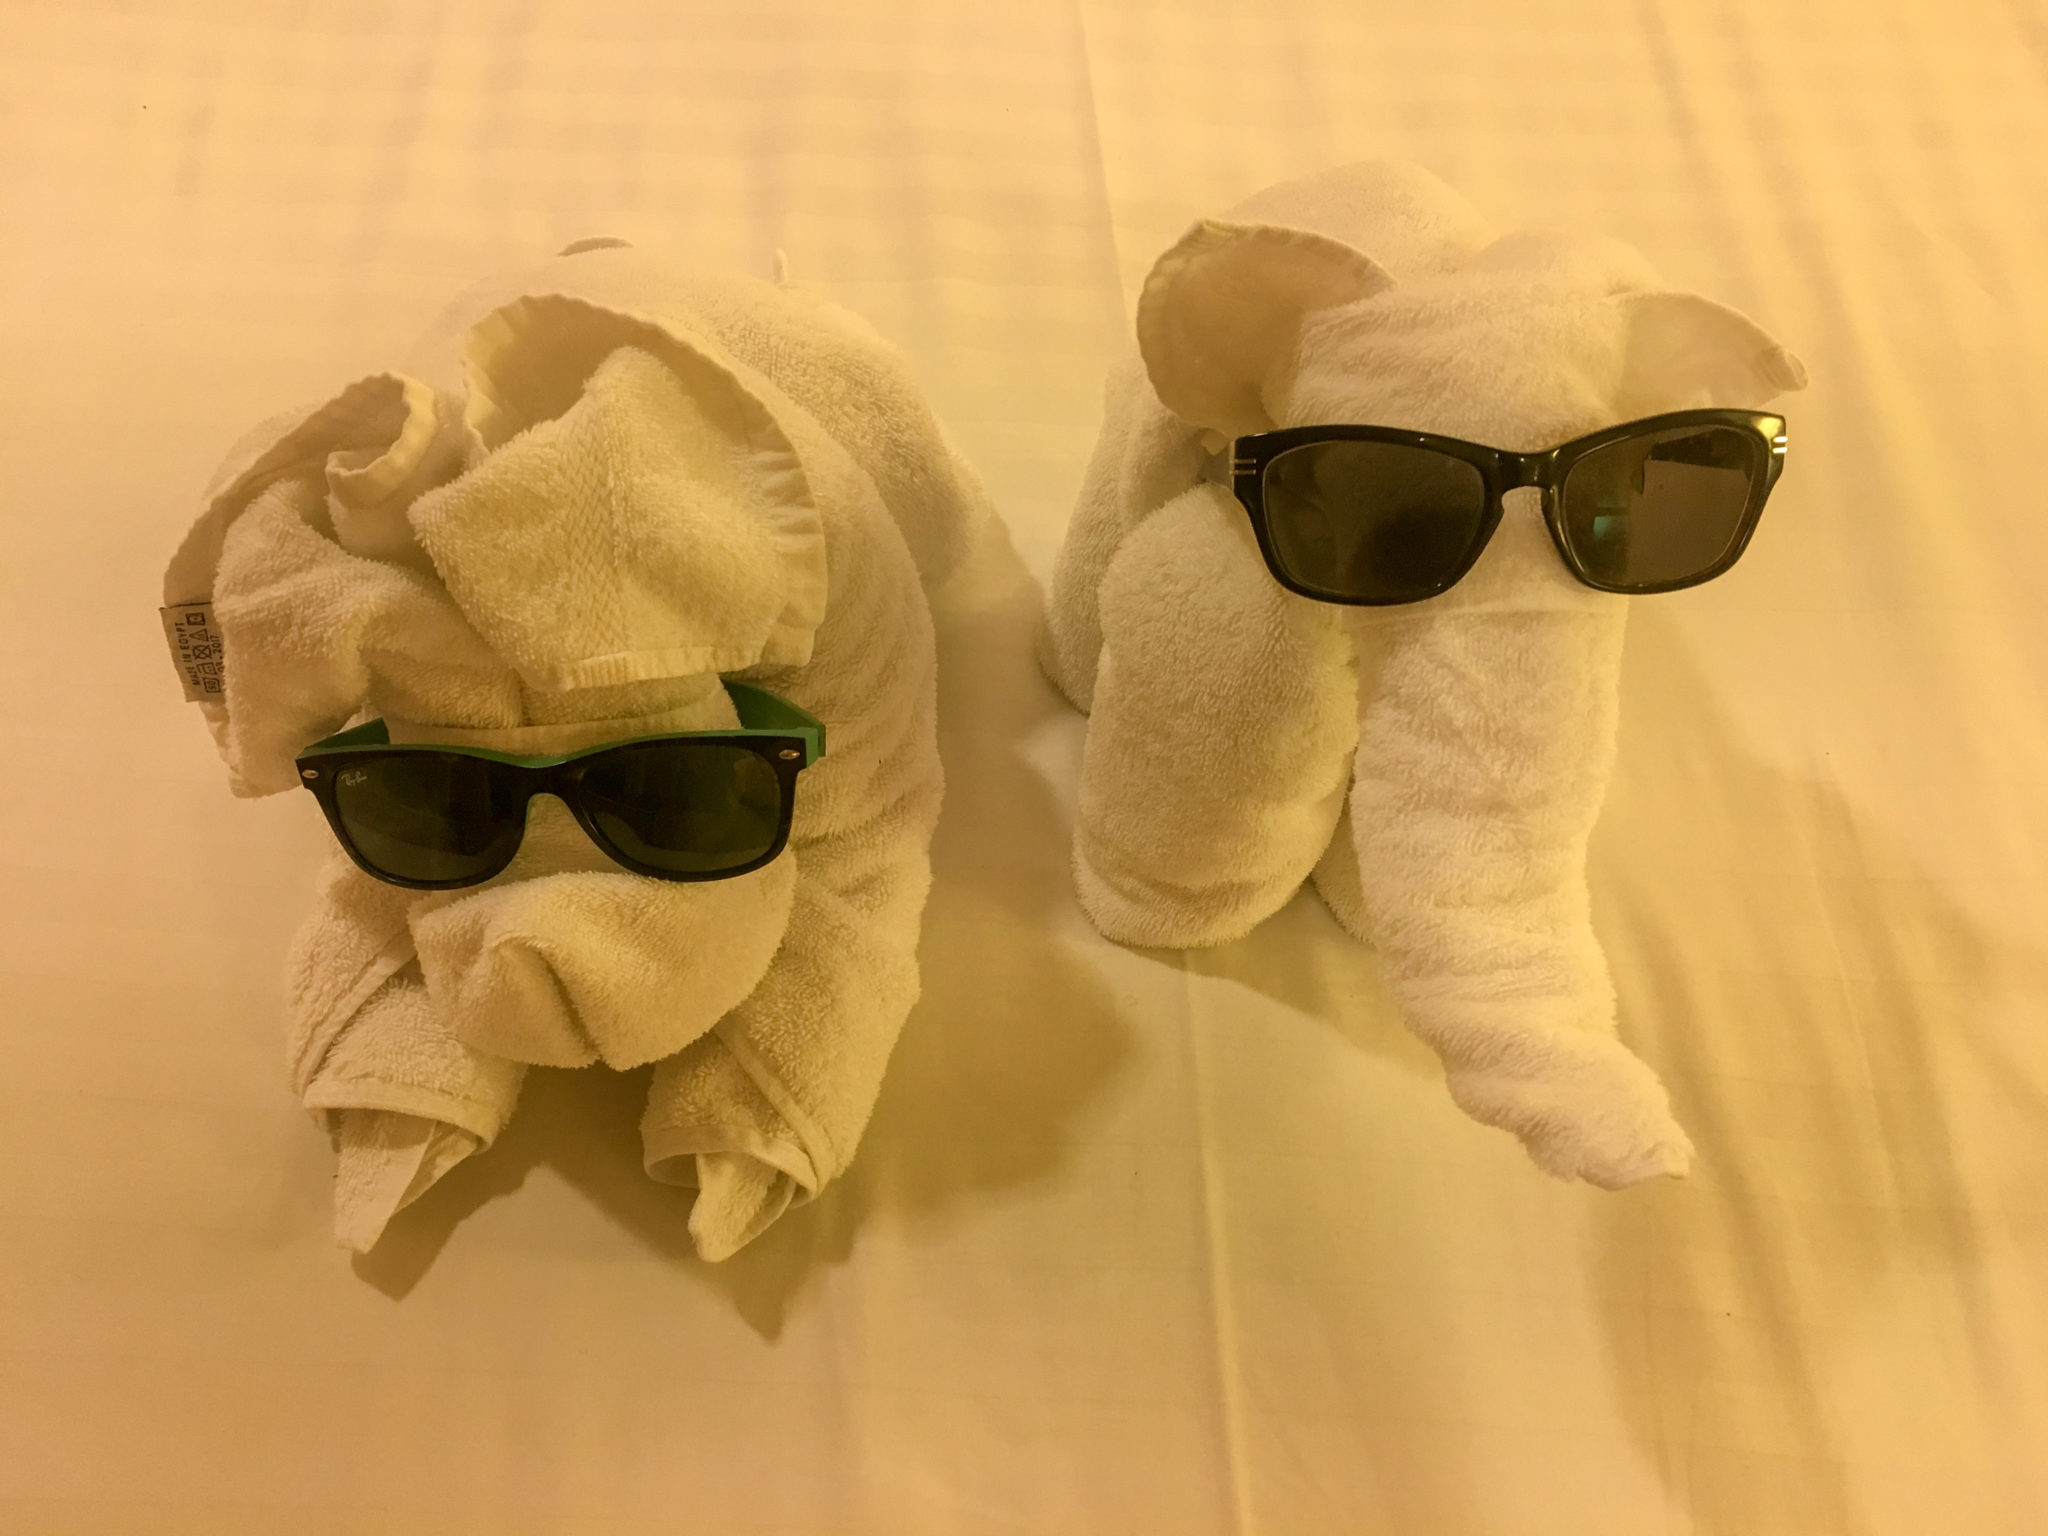 two animals made out of towels wearing sunglasses